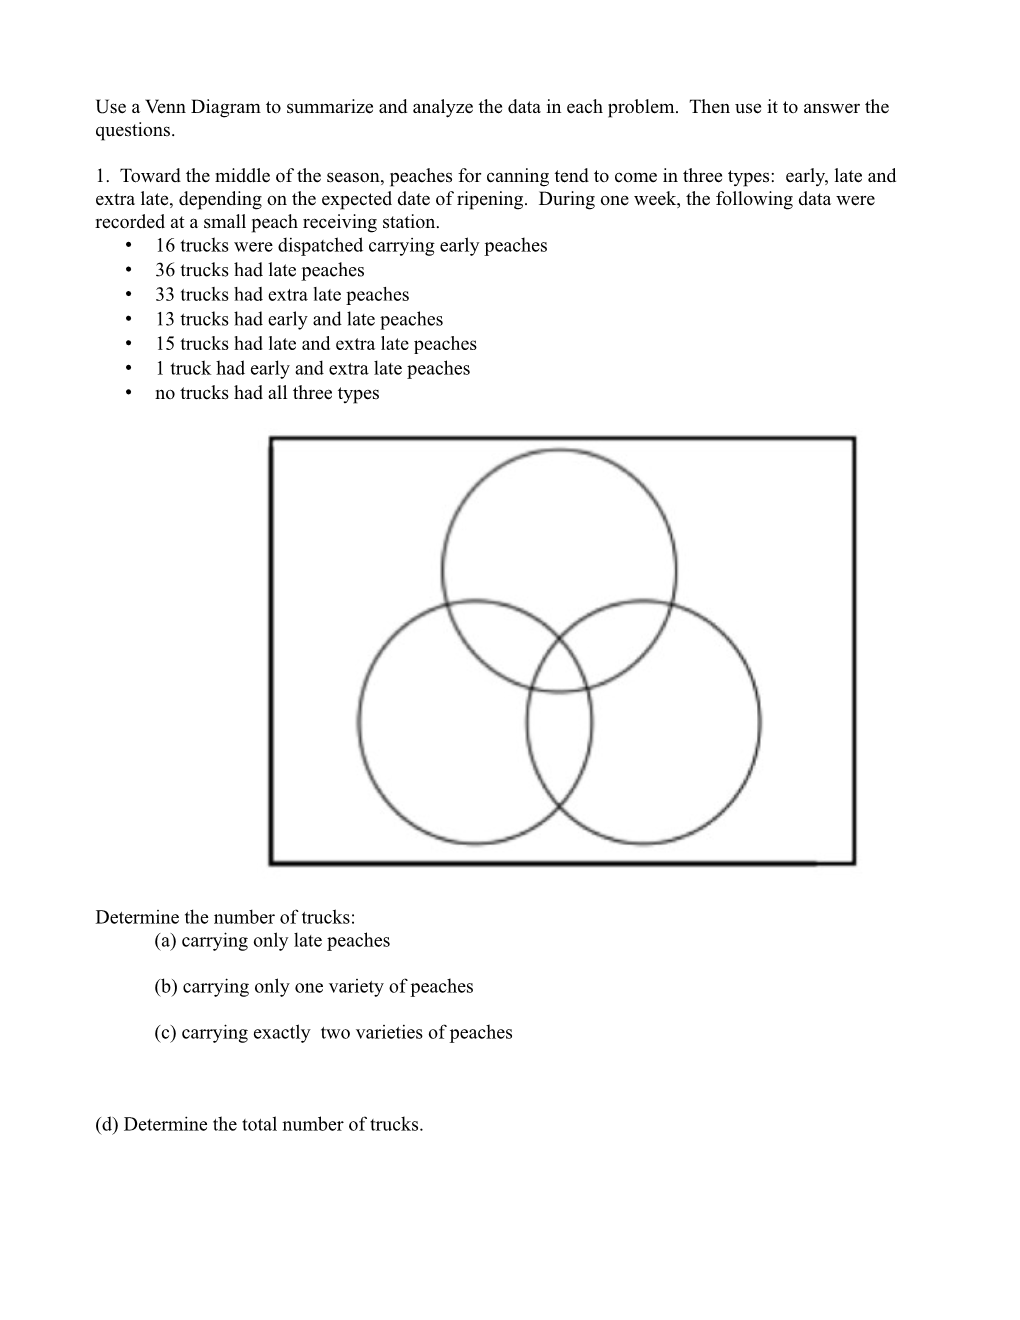 Use a Venn Diagram to Summarize and Analyze the Data in Each Problem